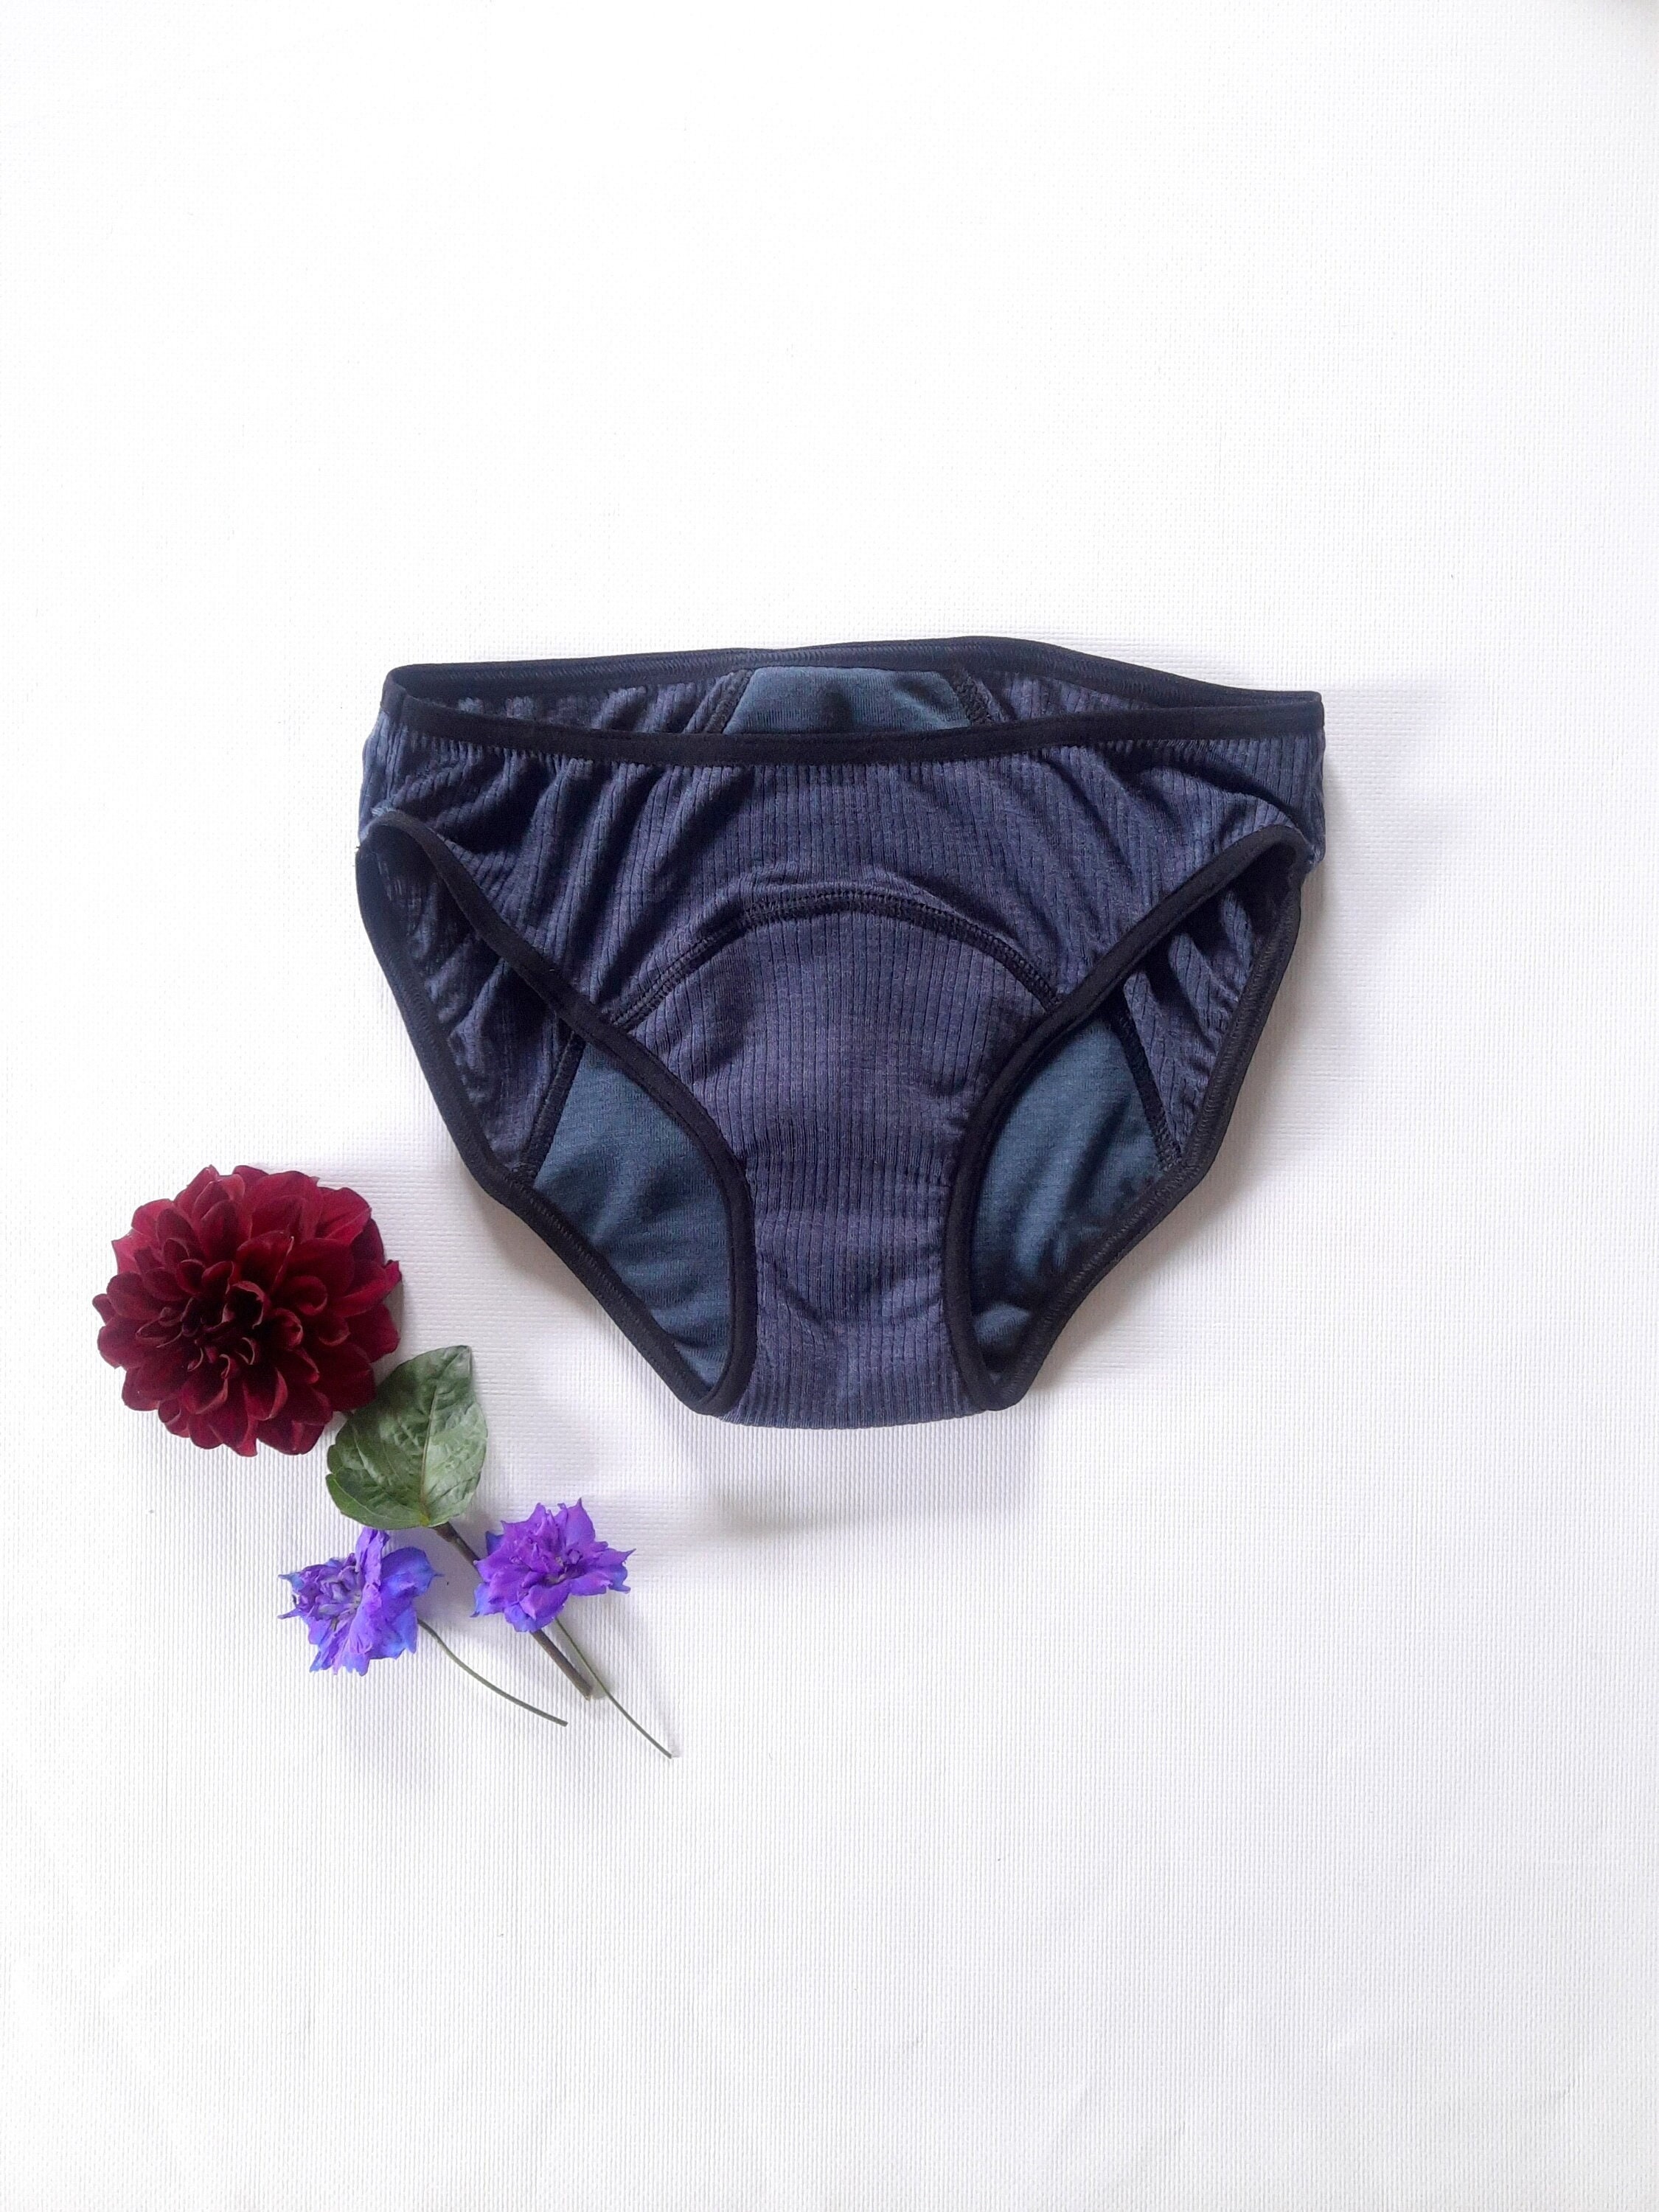 Period Pants Washable and Reusable 